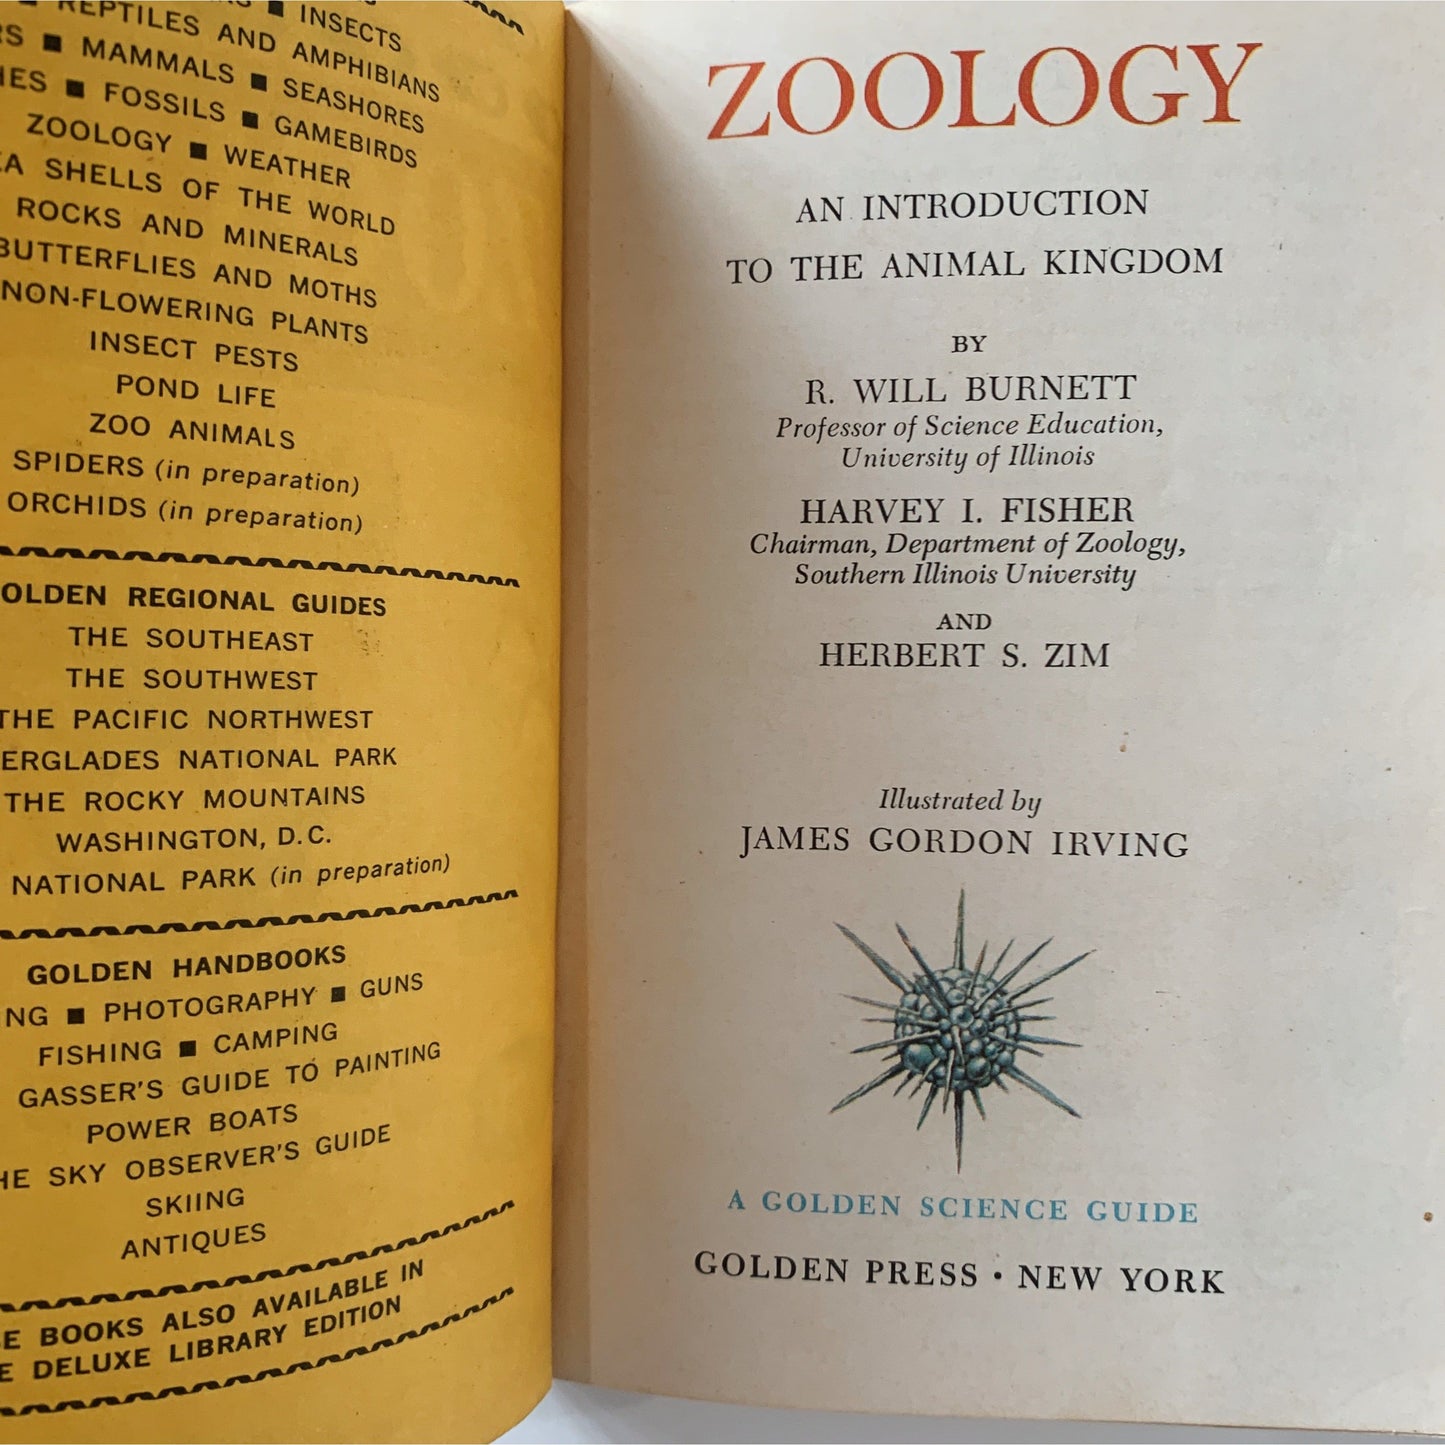 Zoology: An Introduction to the Animal Kingdom, A Golden Science Guide 1958